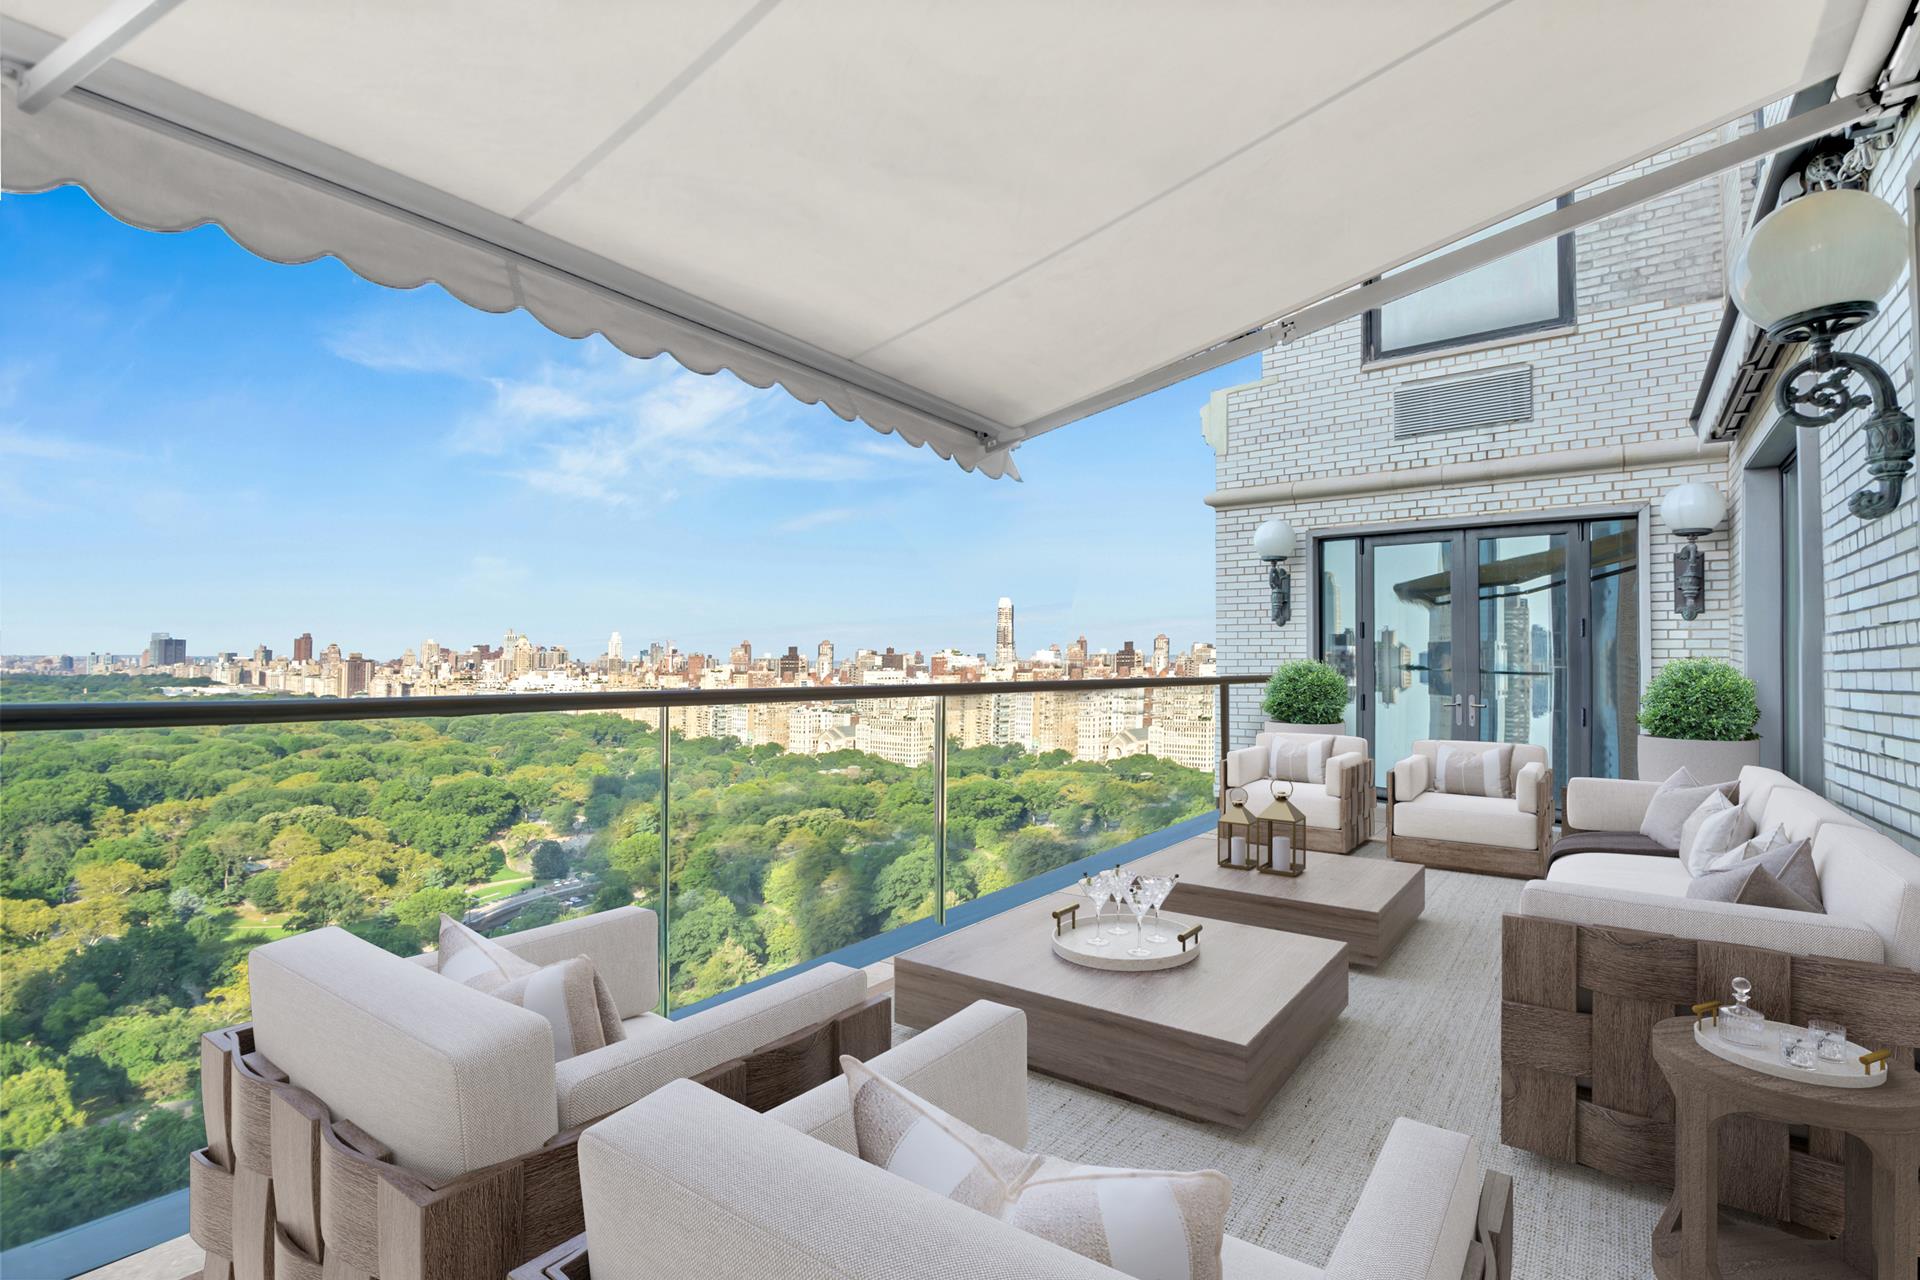 150 Central Park 29West, Central Park South, Midtown West, NYC - 3 Bedrooms  
4.5 Bathrooms  
7 Rooms - 